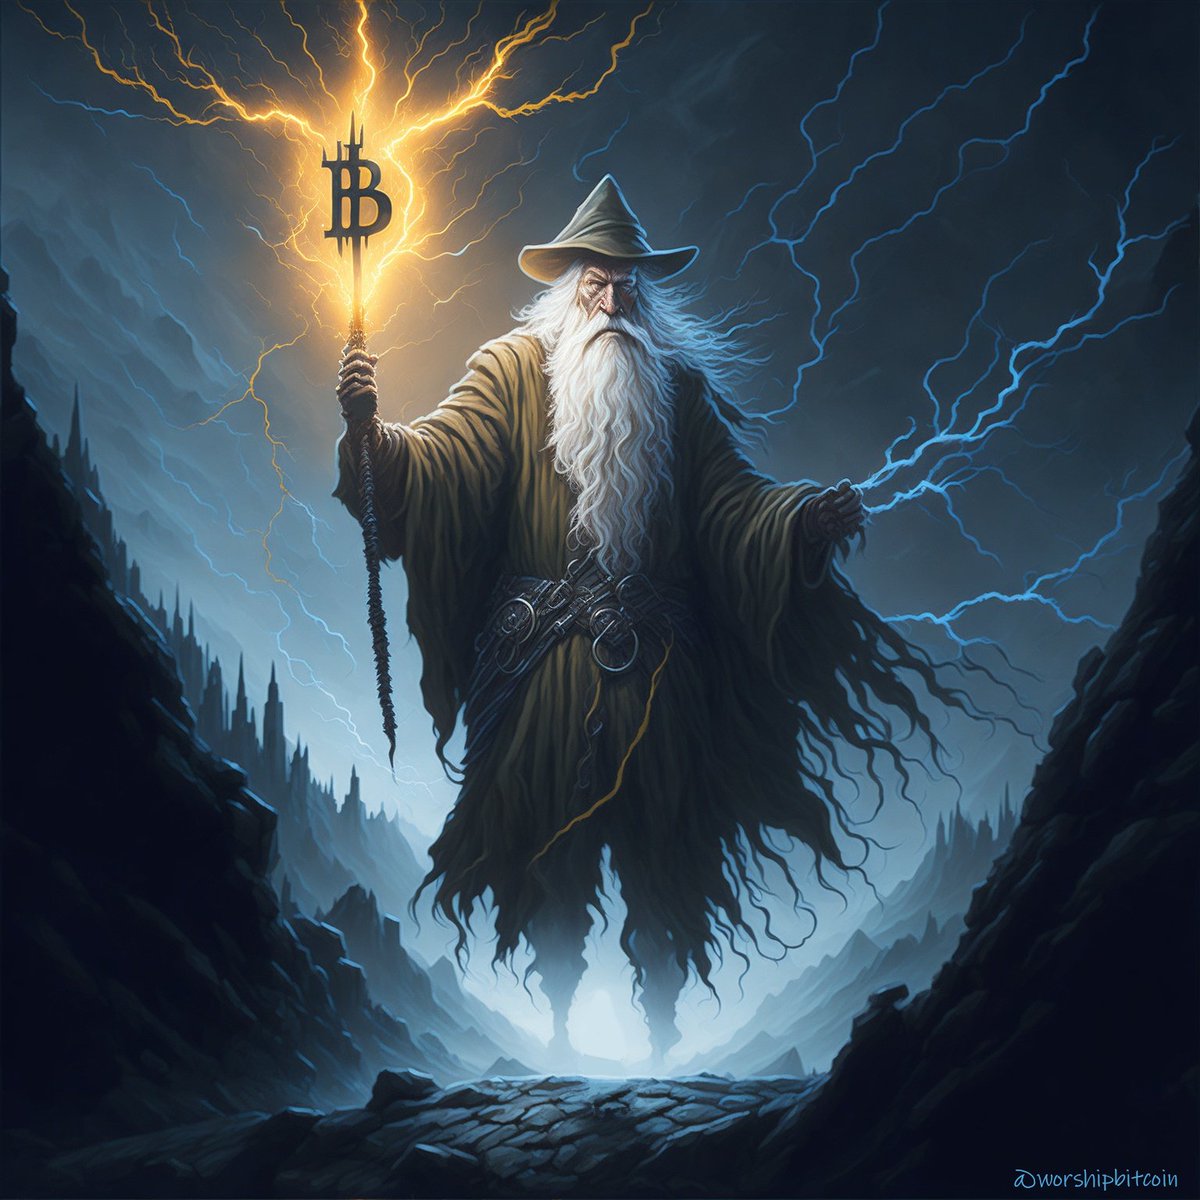 #Bitcoin is supercharged by #Lightning